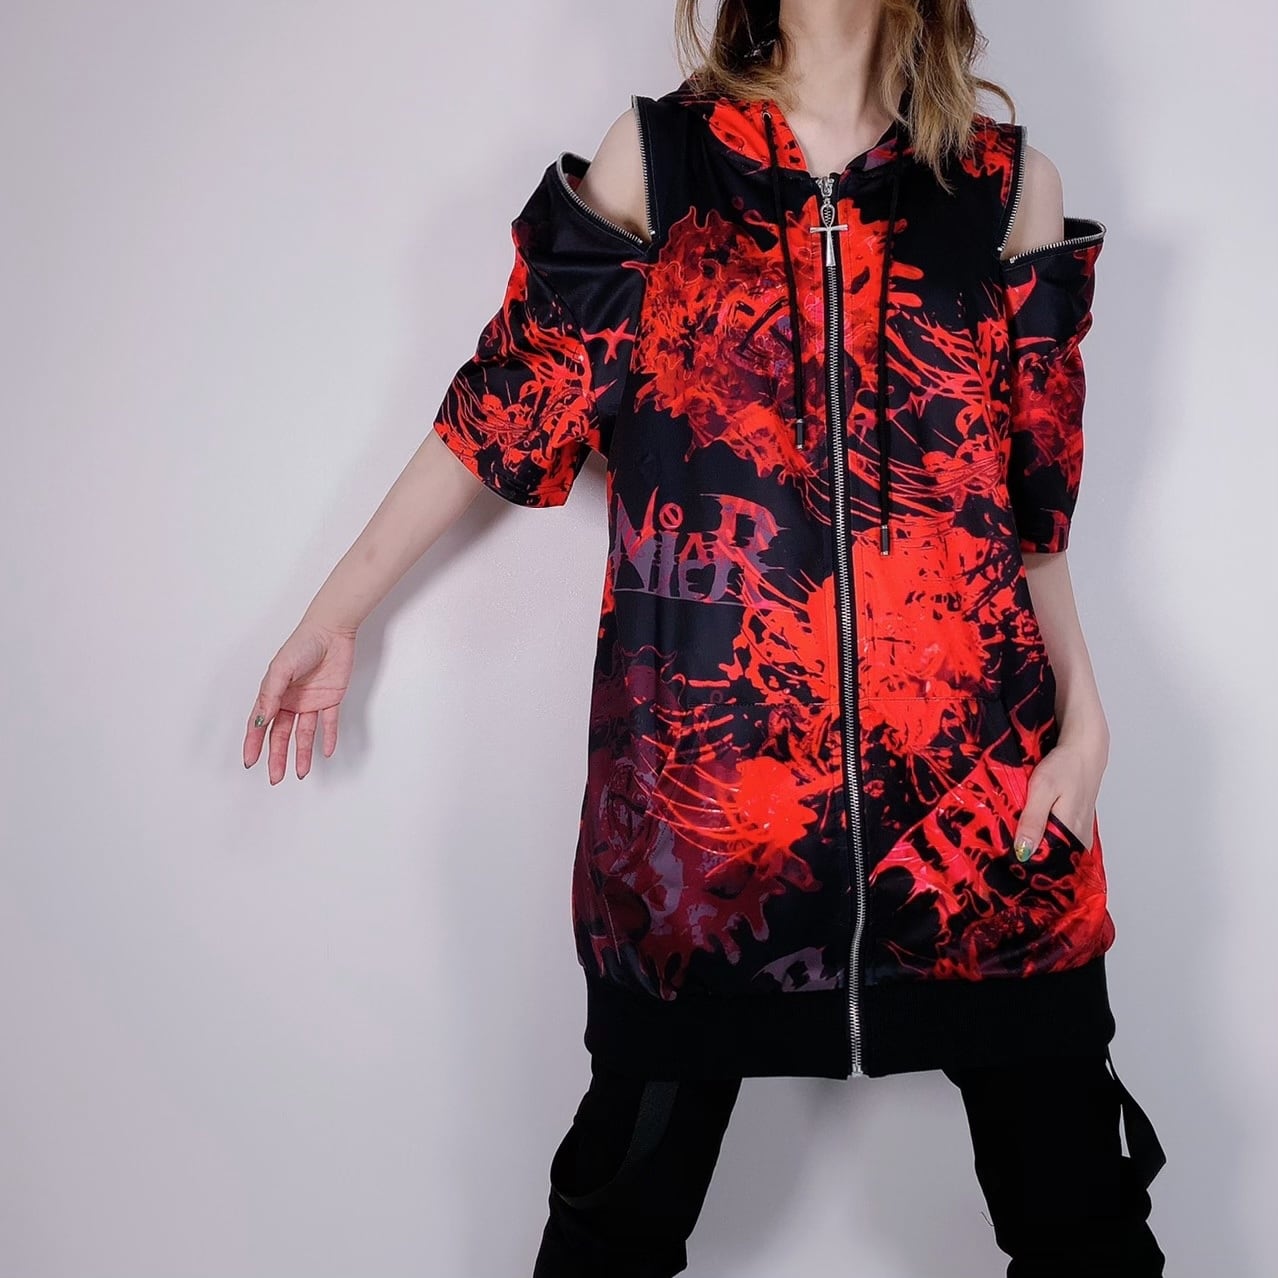 2WAY OFF-Shoulder半袖ZIP PARKA【彼岸花】 | NIER CLOTHING powered by BASE